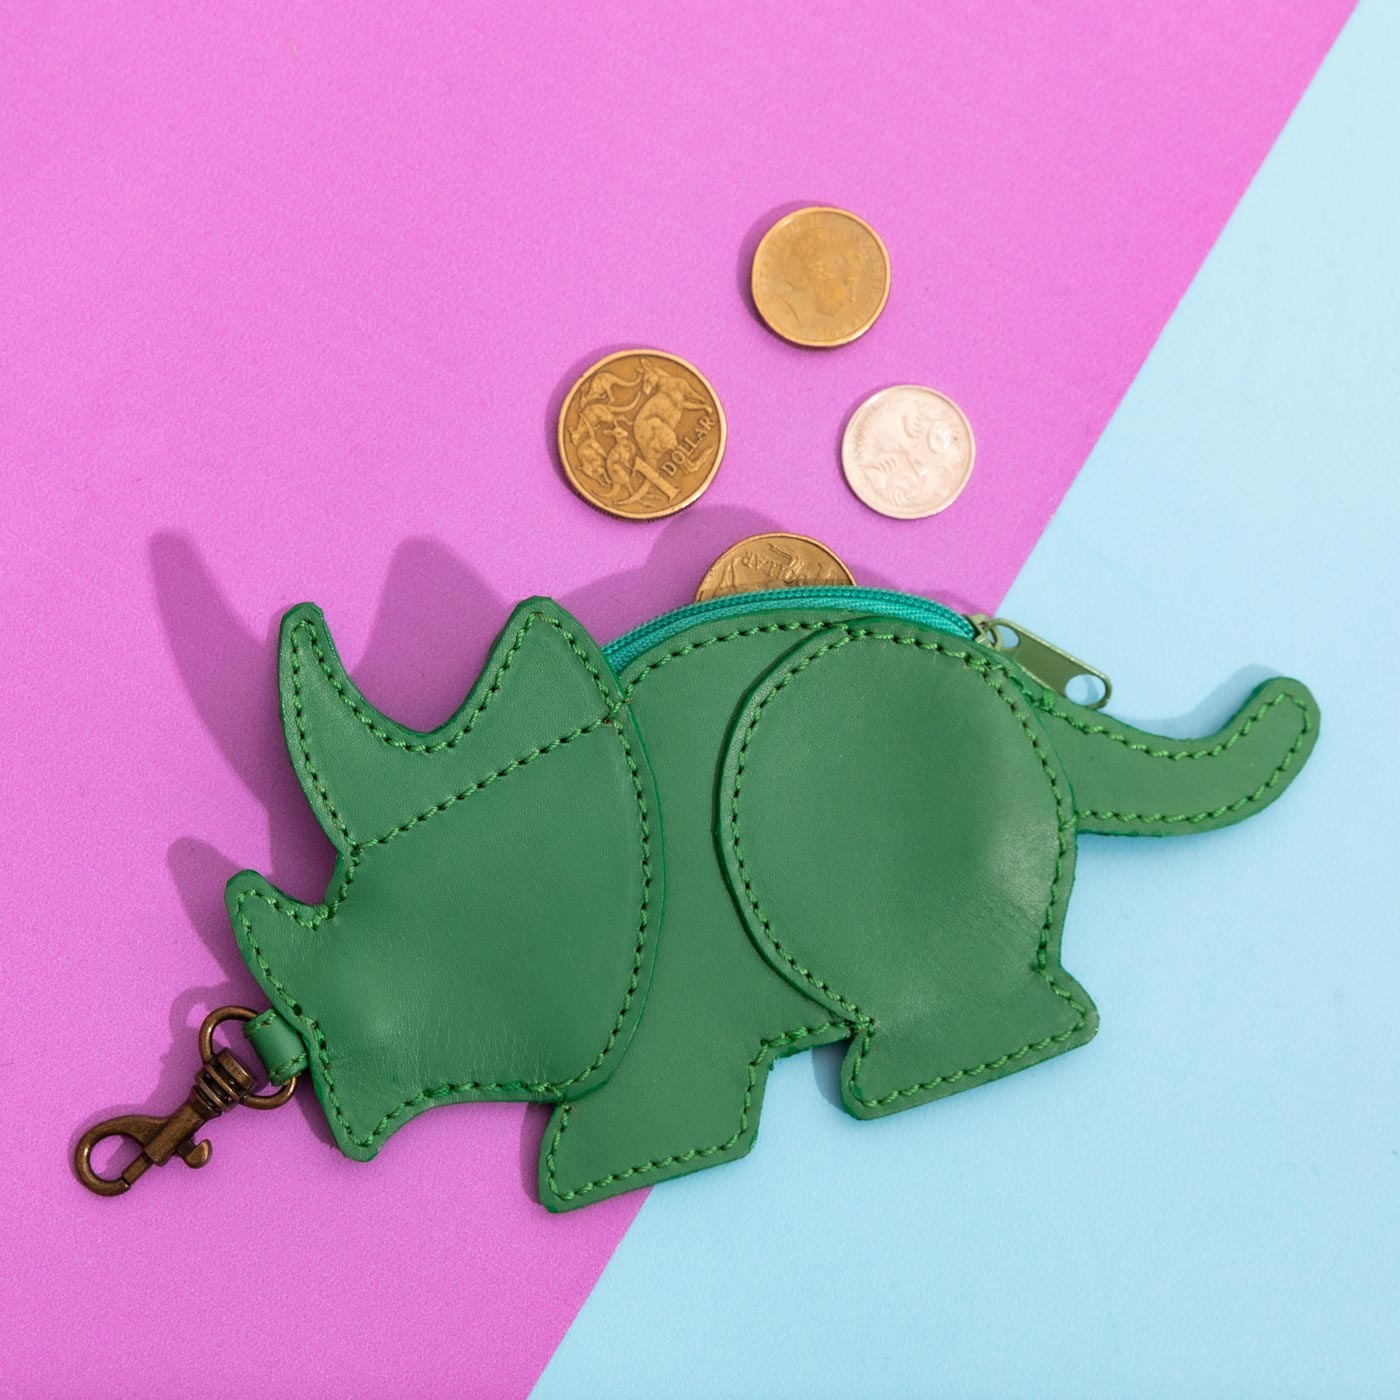 Wicker Darling's Benedict the dinosaur coin purse on a colourful background